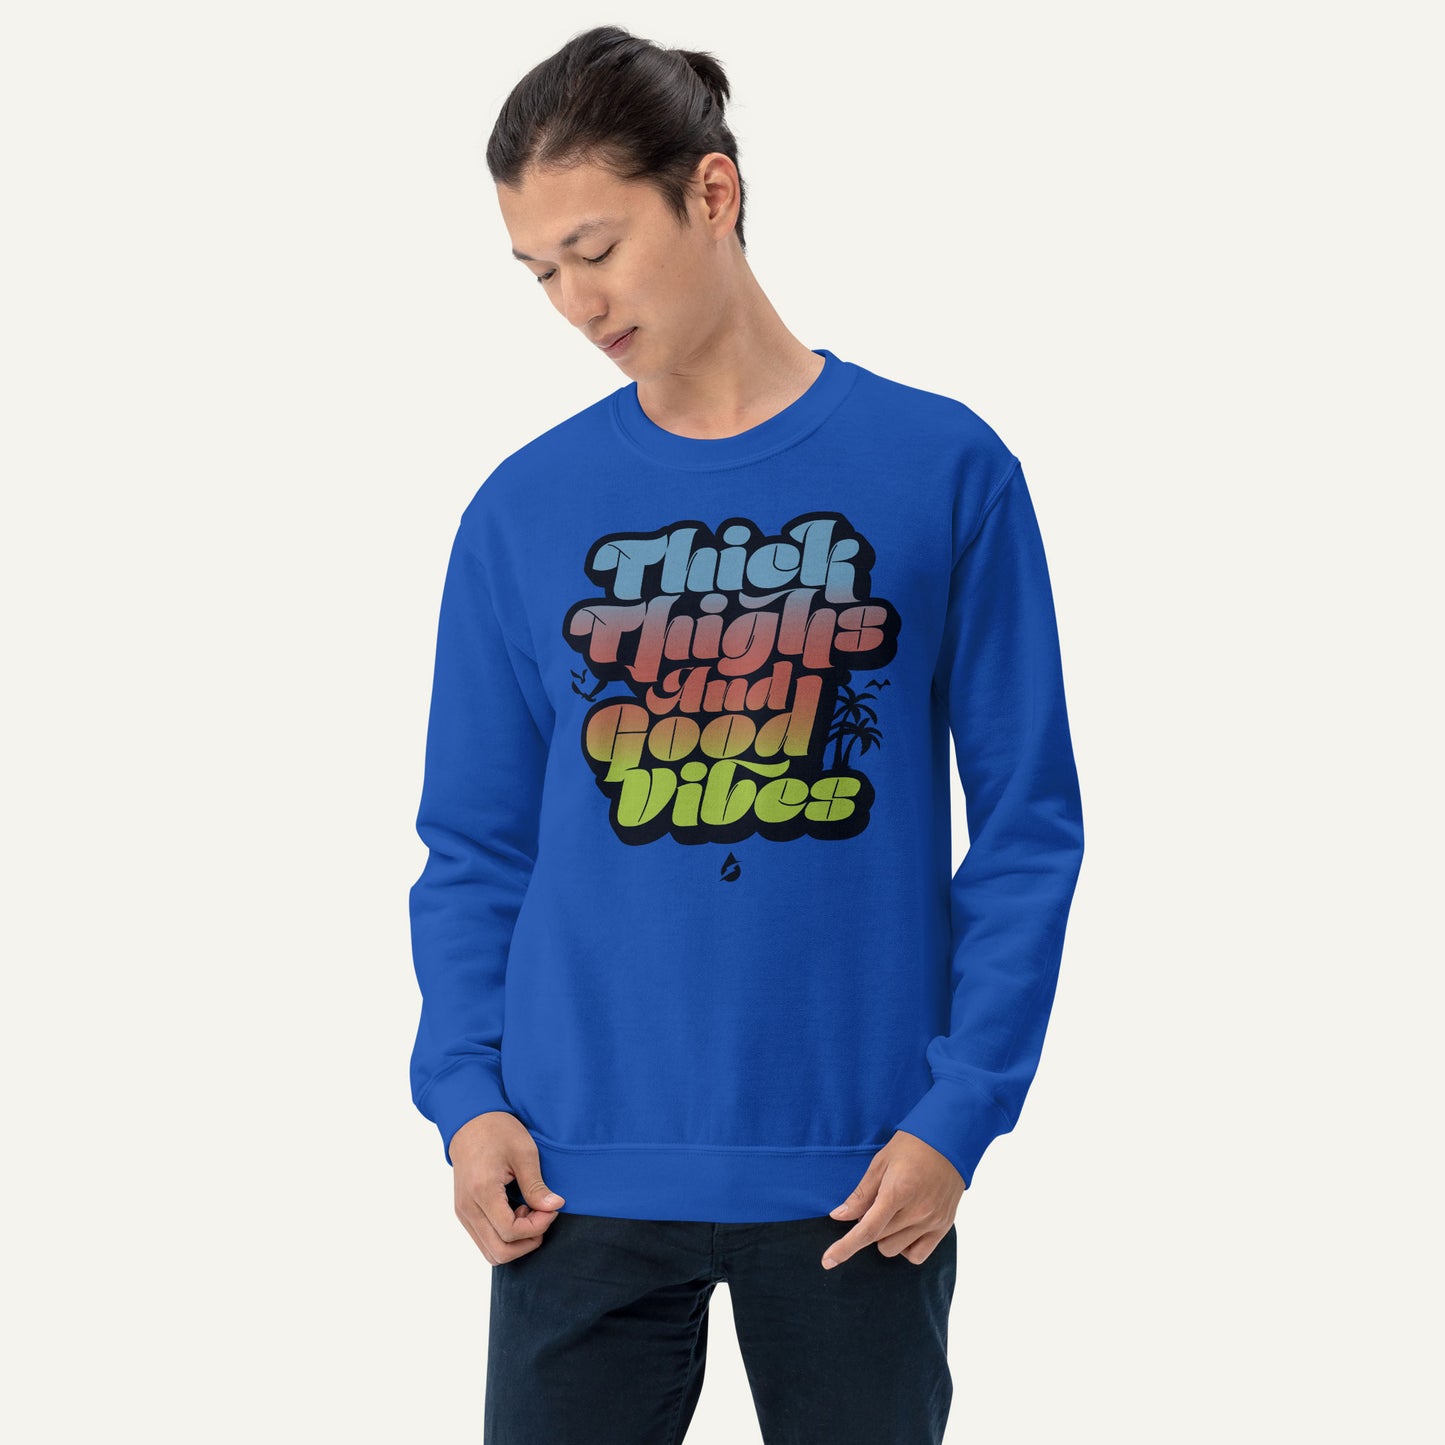 Thick Thighs And Good Vibes Sweatshirt